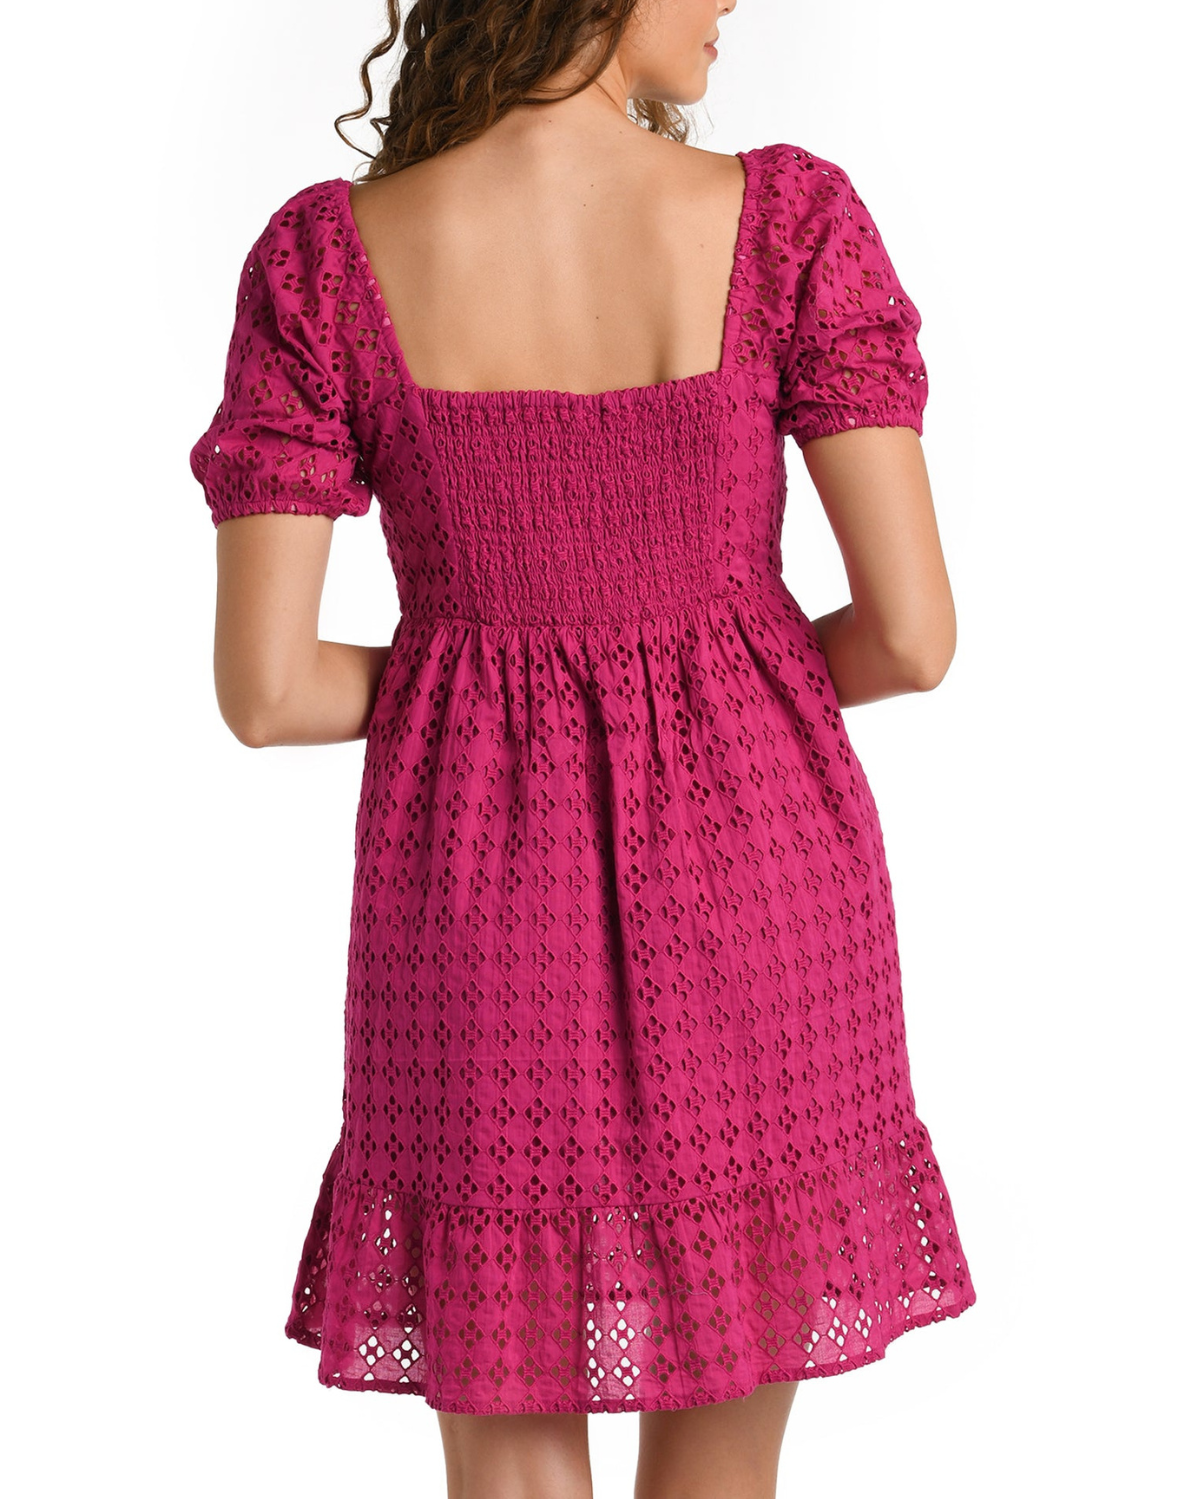 Model wearing a short sleeve cover up dress in pink